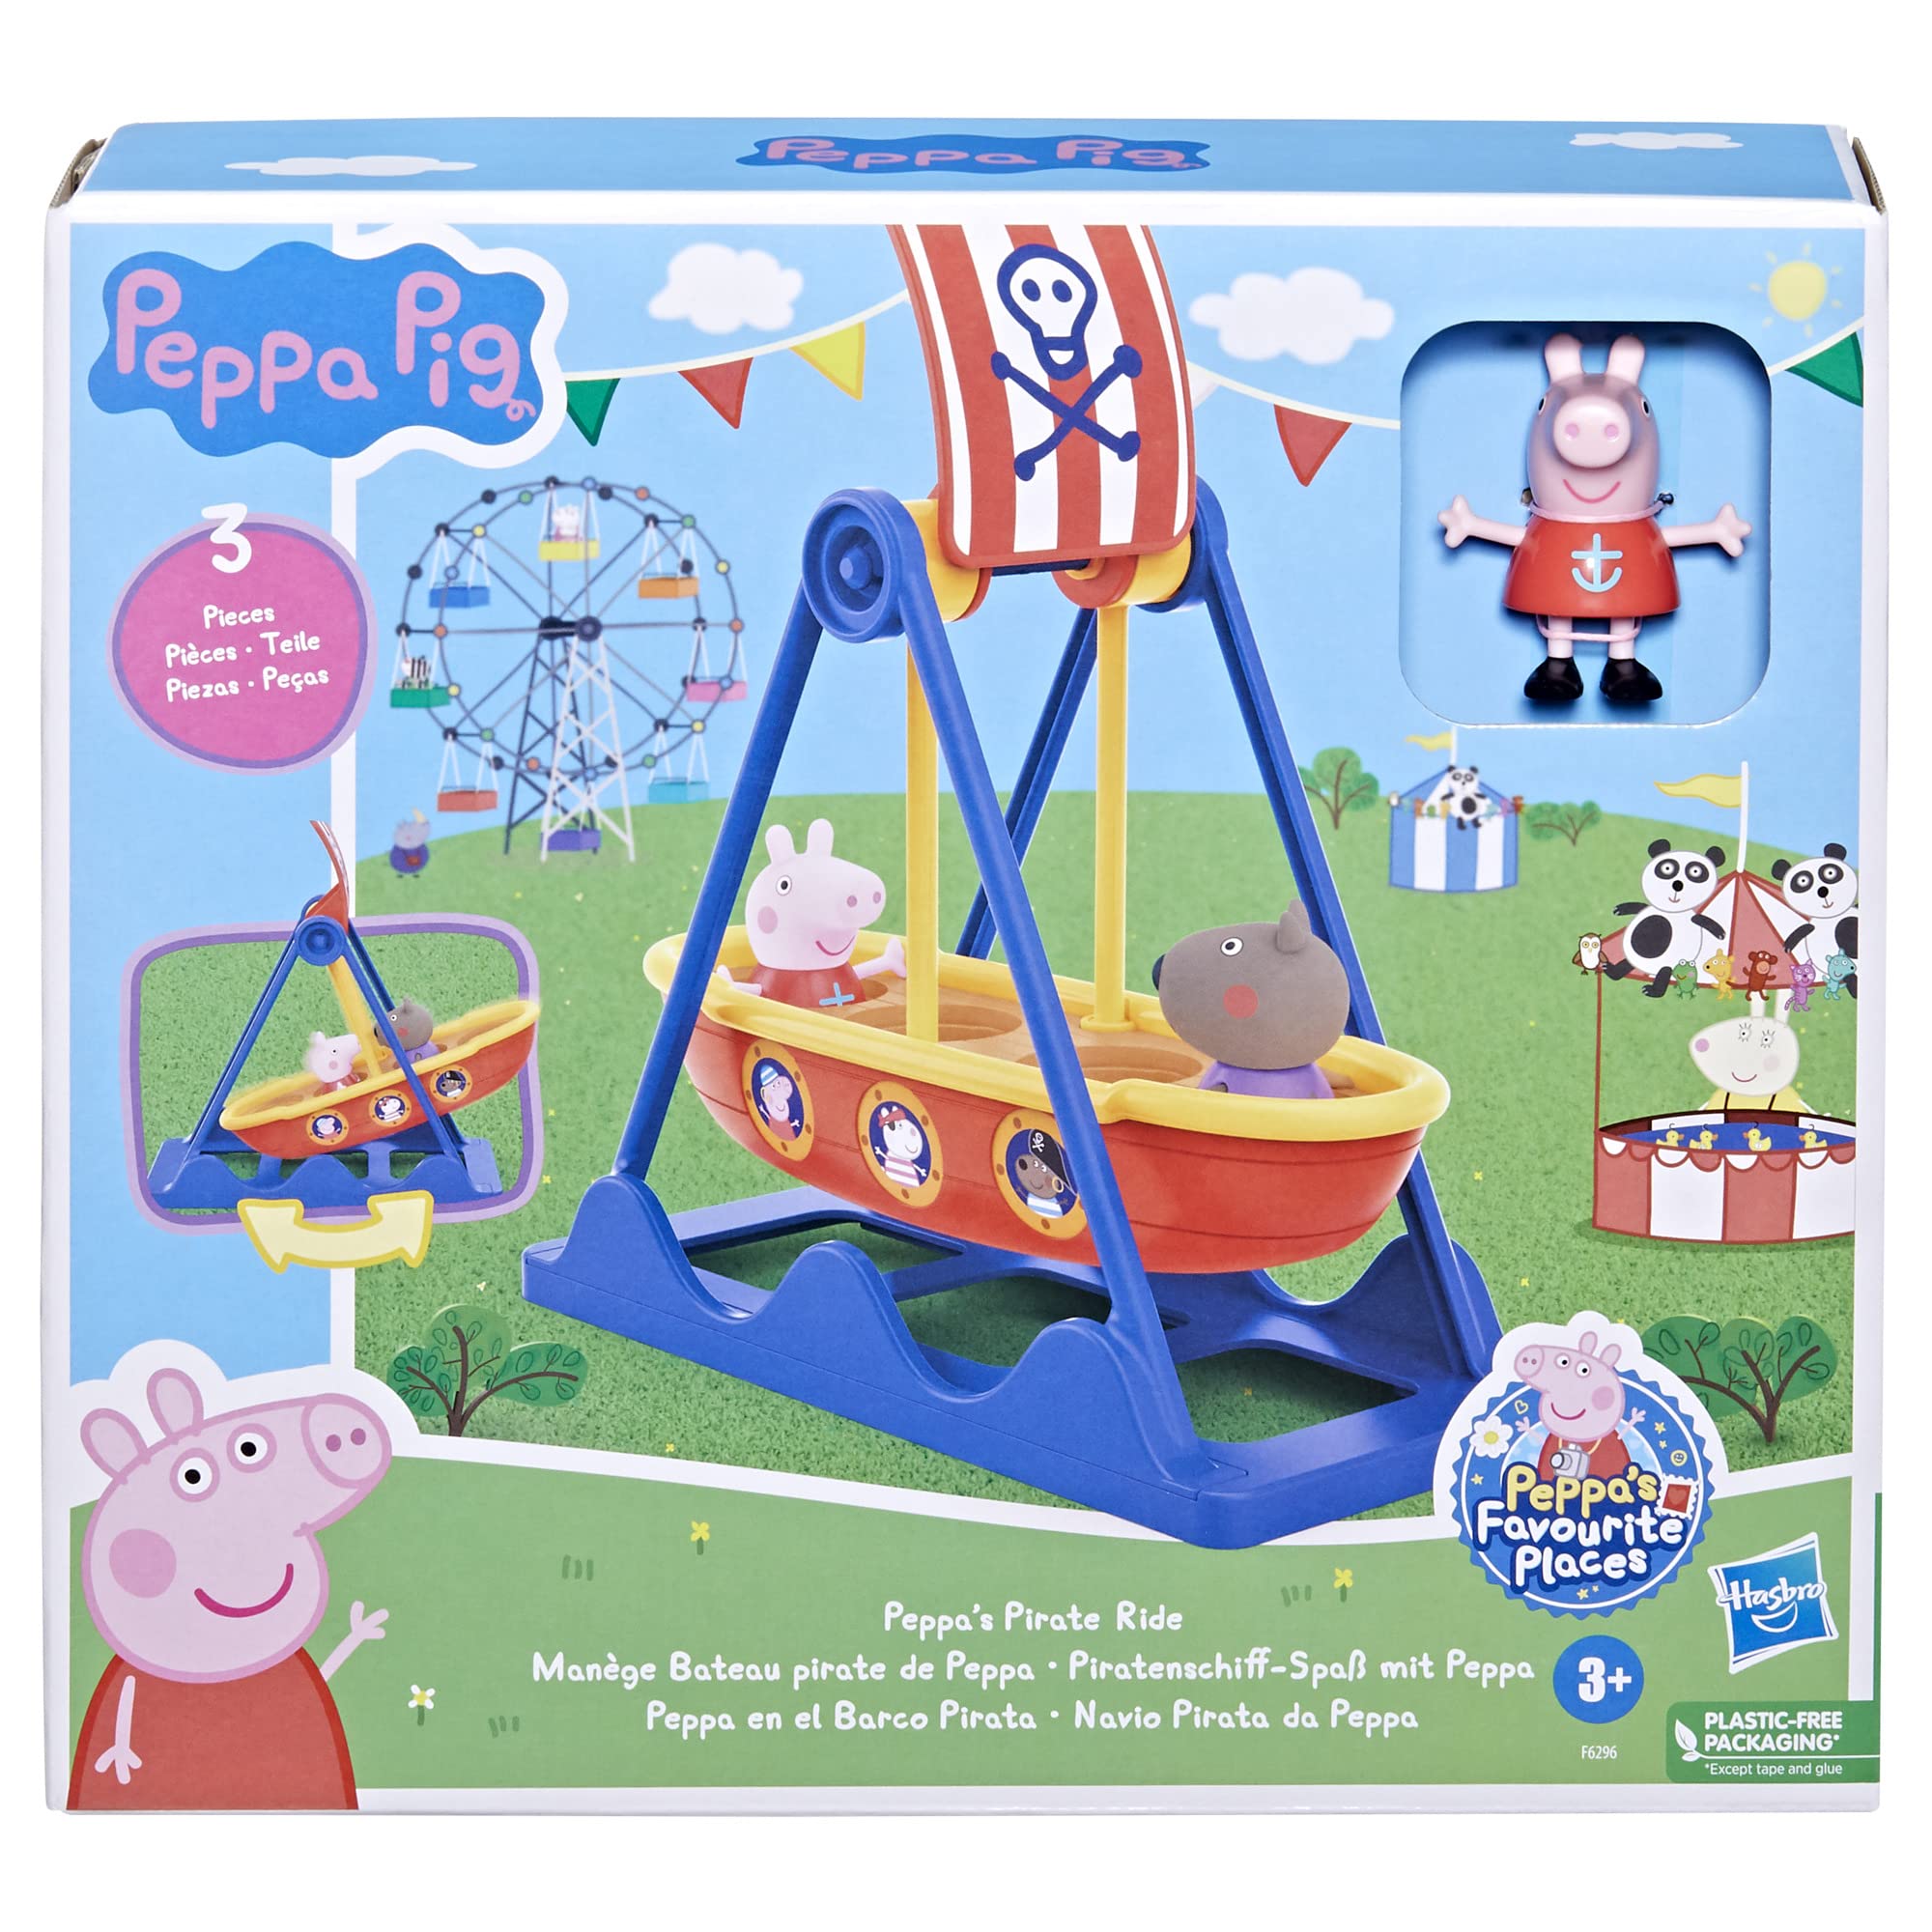 Peppa Pig Toys Peppa's Pirate Ride Playset with Swinging Pirate Ship and 2 Figures, Preschool Toys for 3 Year Old Girls and Boys and Up